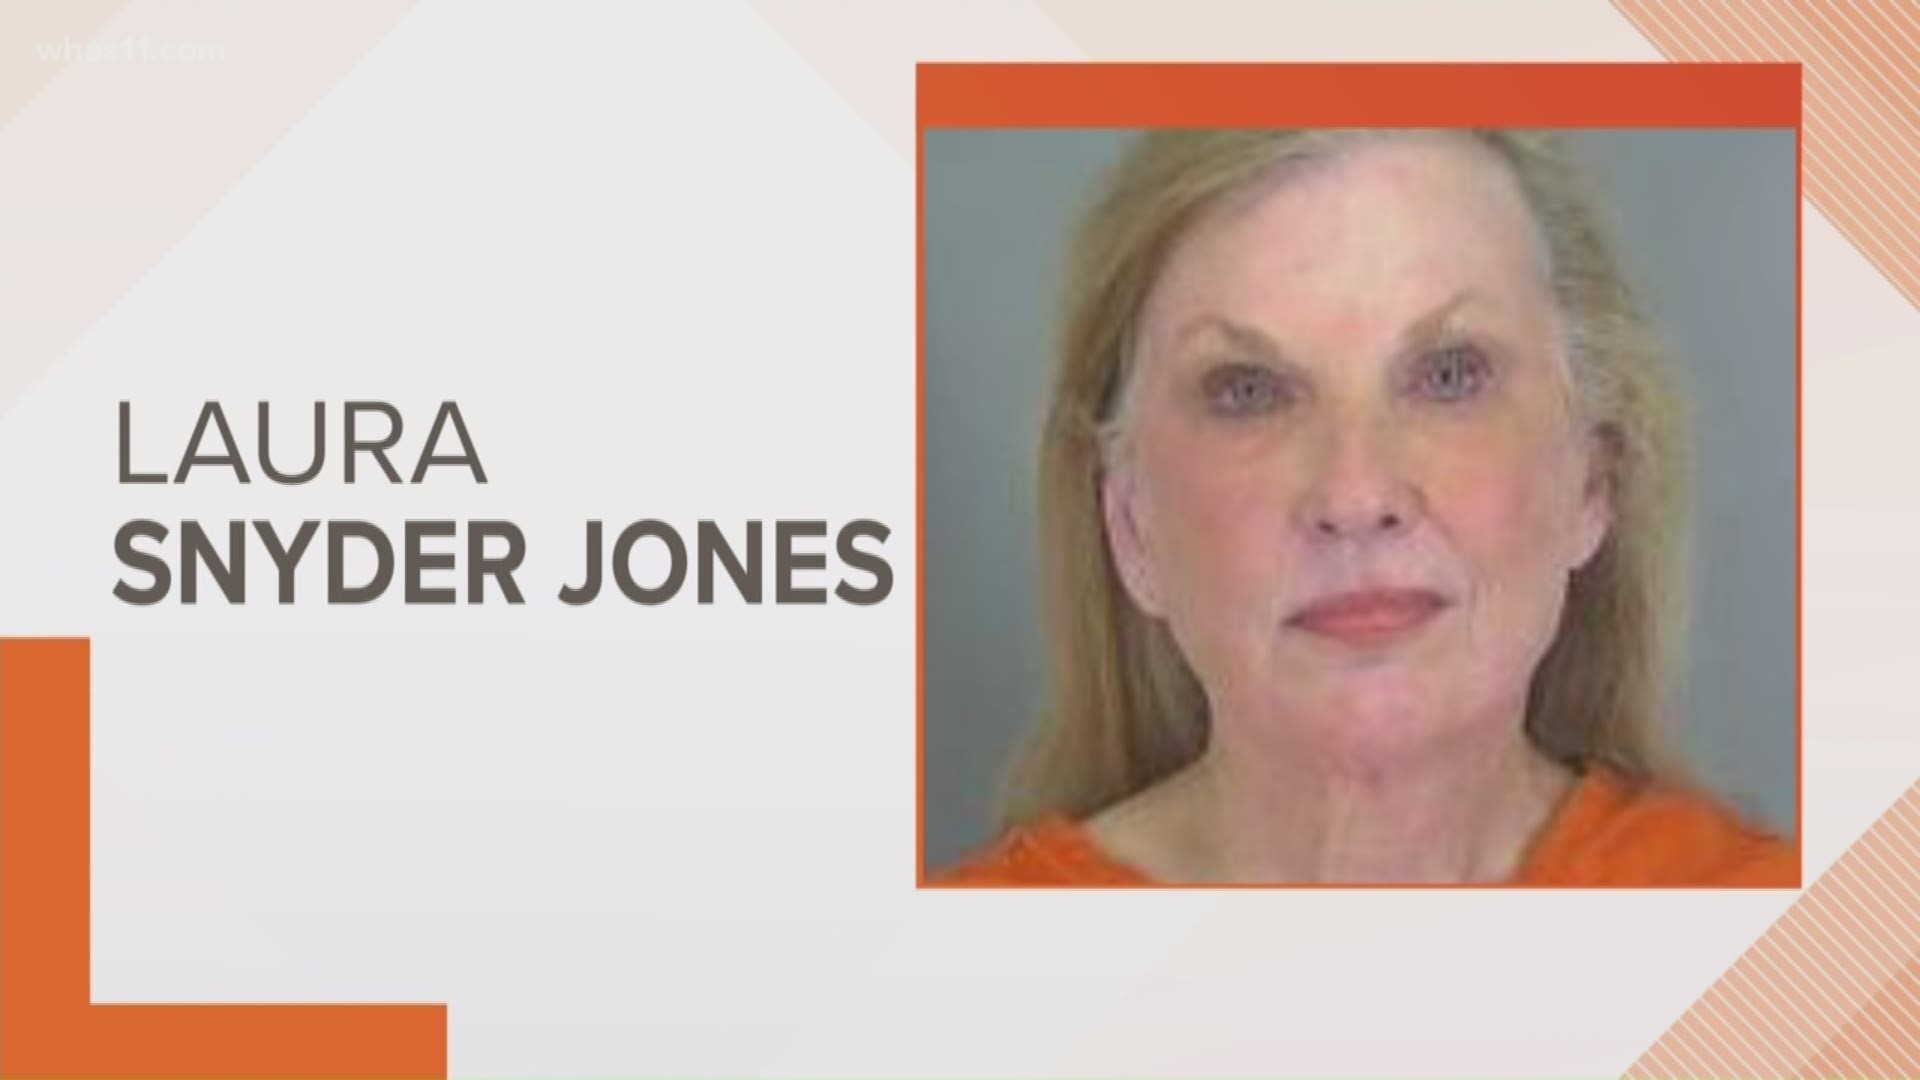 73-year-old Laura Jones was arrested for making a bomb threat in the Greenville-Spartanburg International Airport.